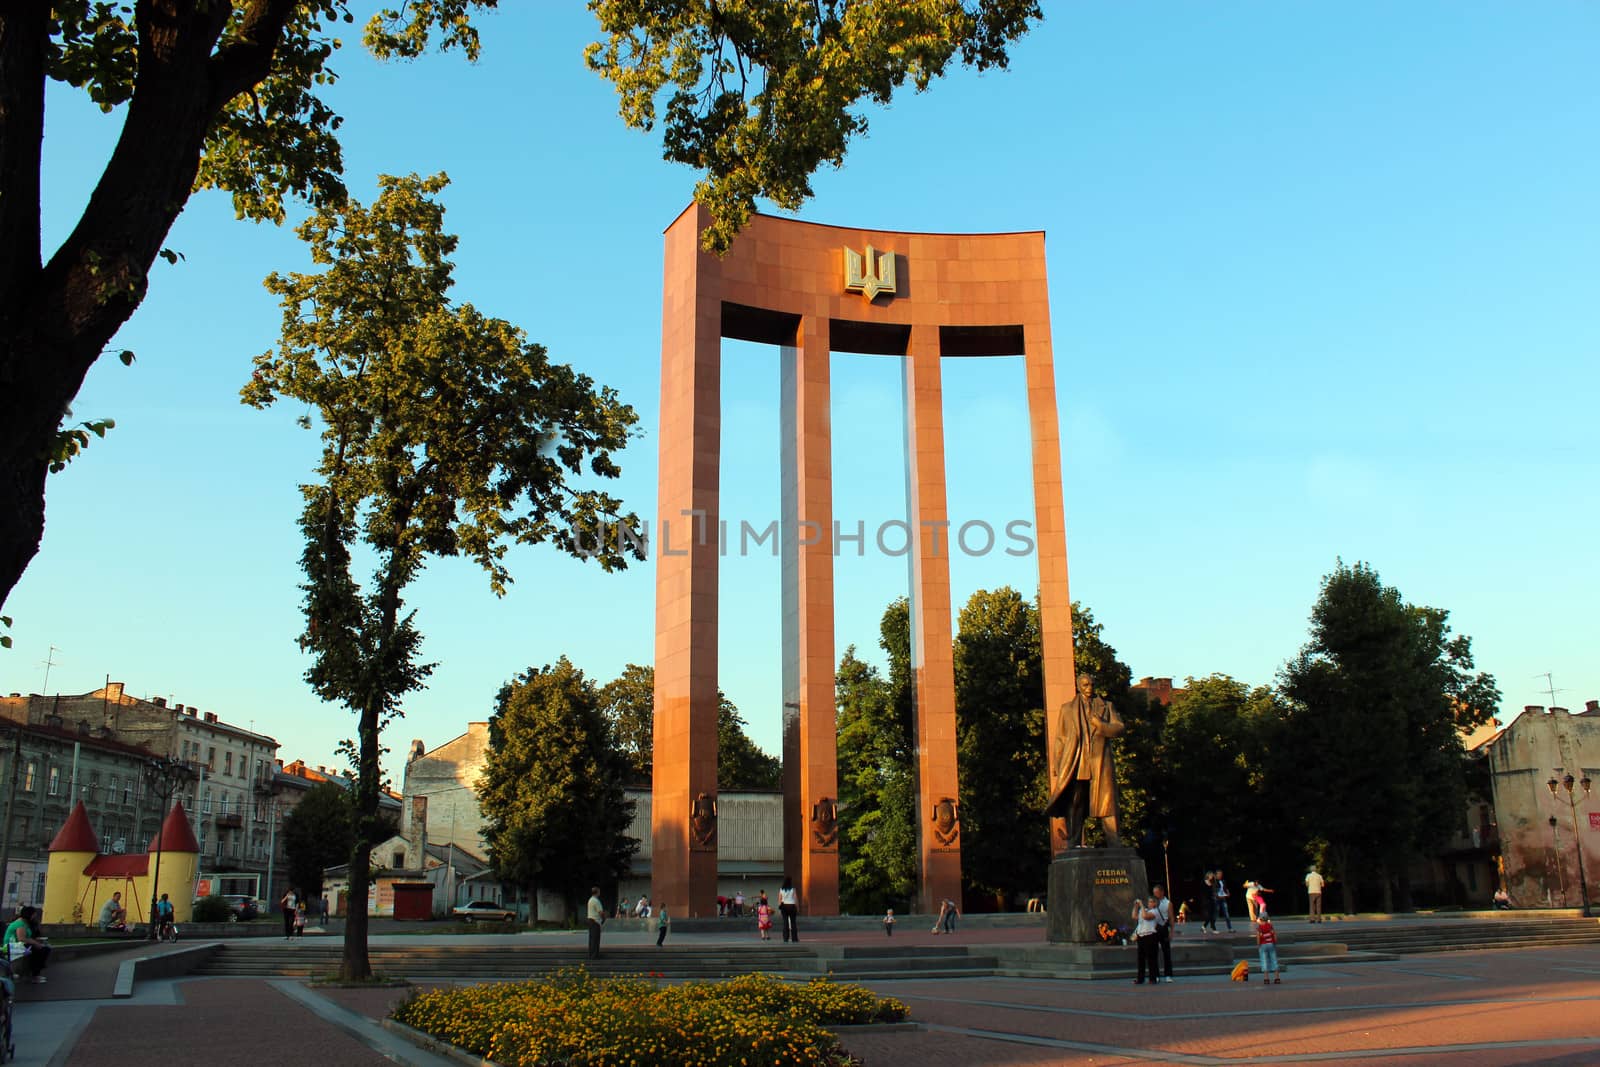 monument of S. Bandera and trident in Lvov city by alexmak